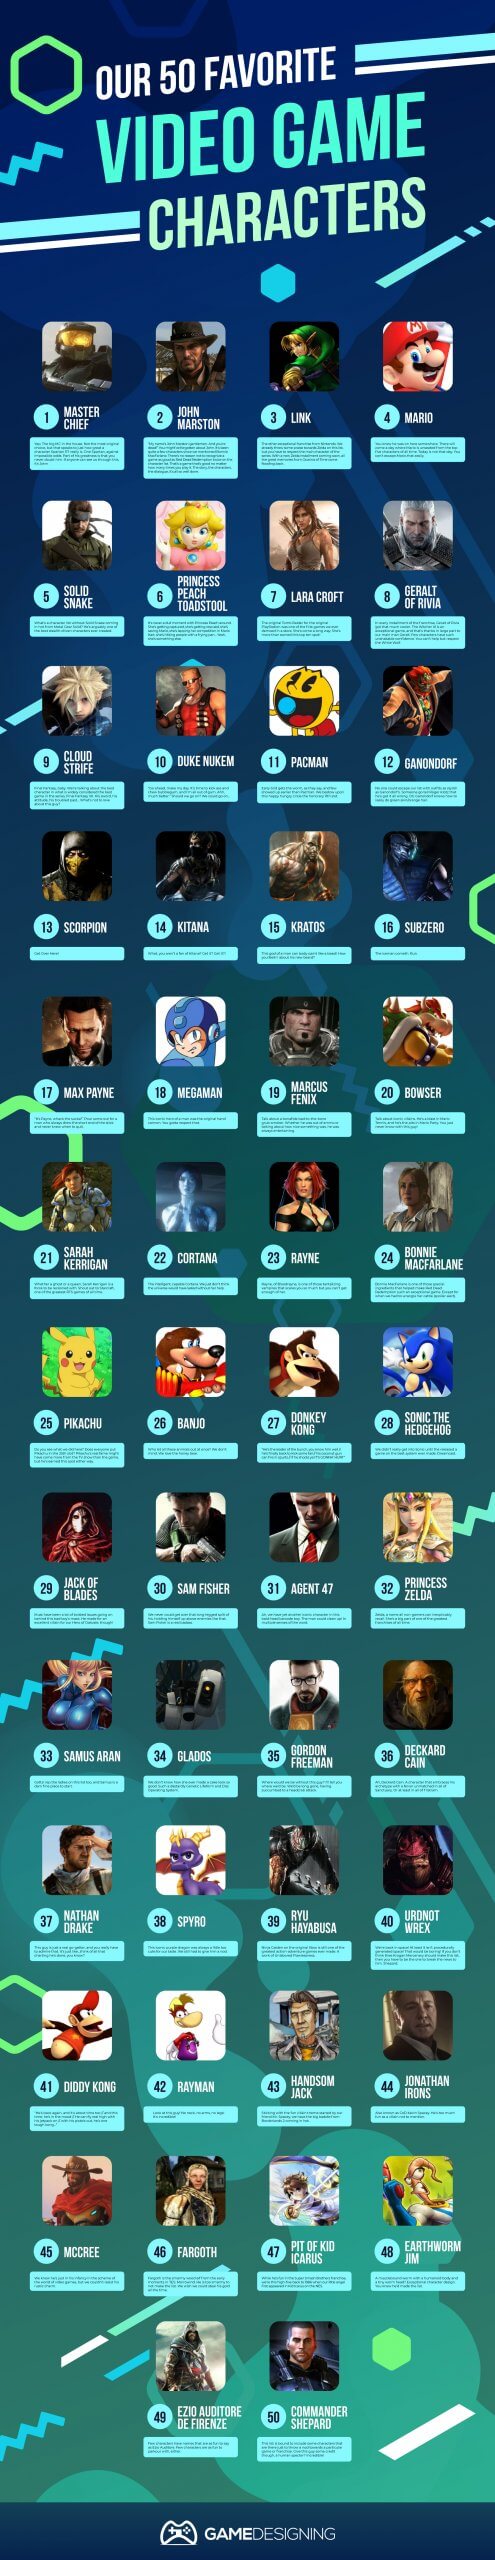 most famous video games of all time